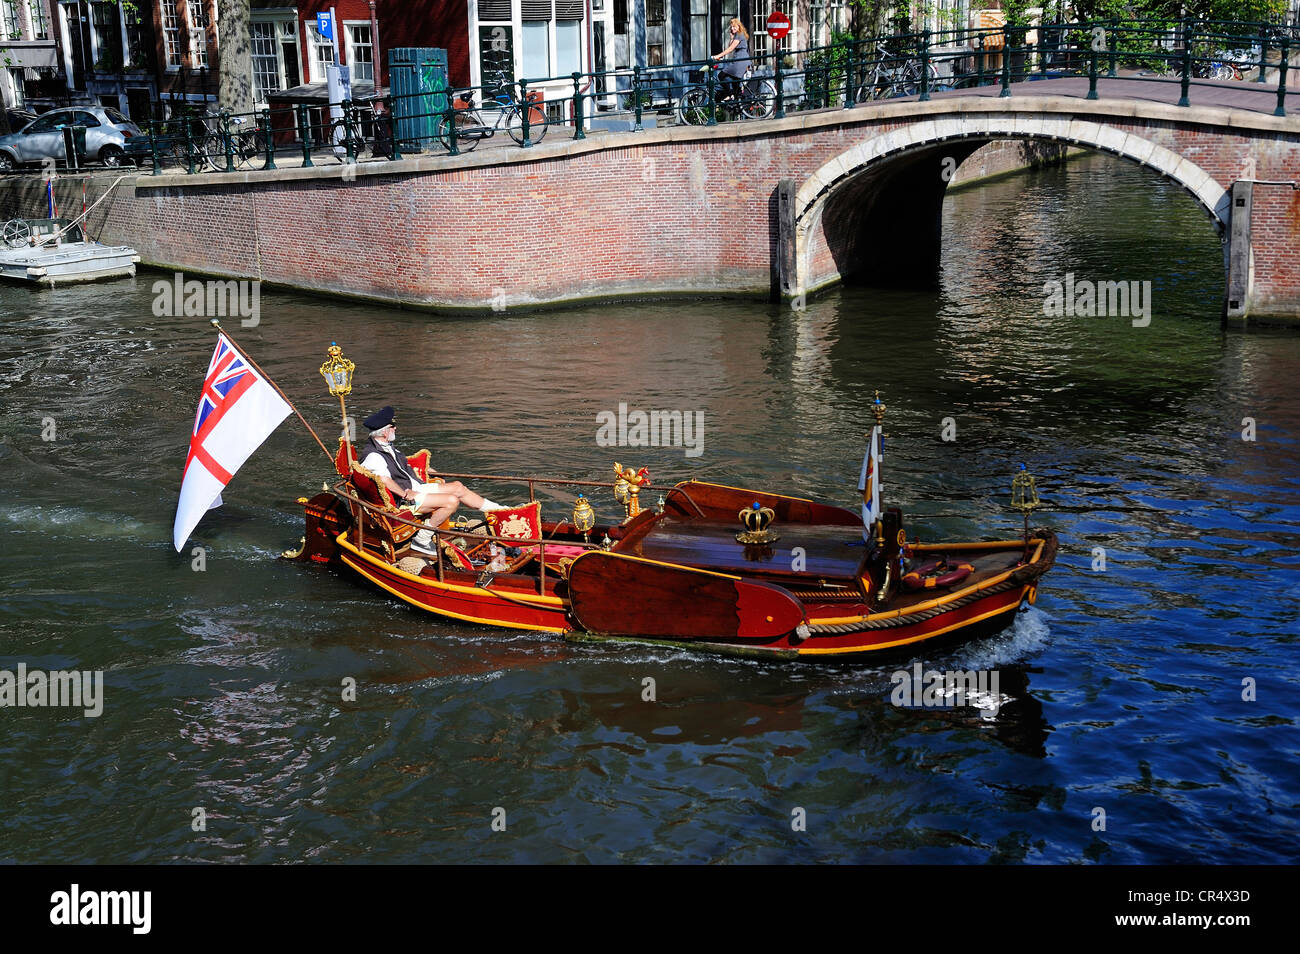 Netherlands, Amsterdam, traditional boat with an English and British flag Stock Photo